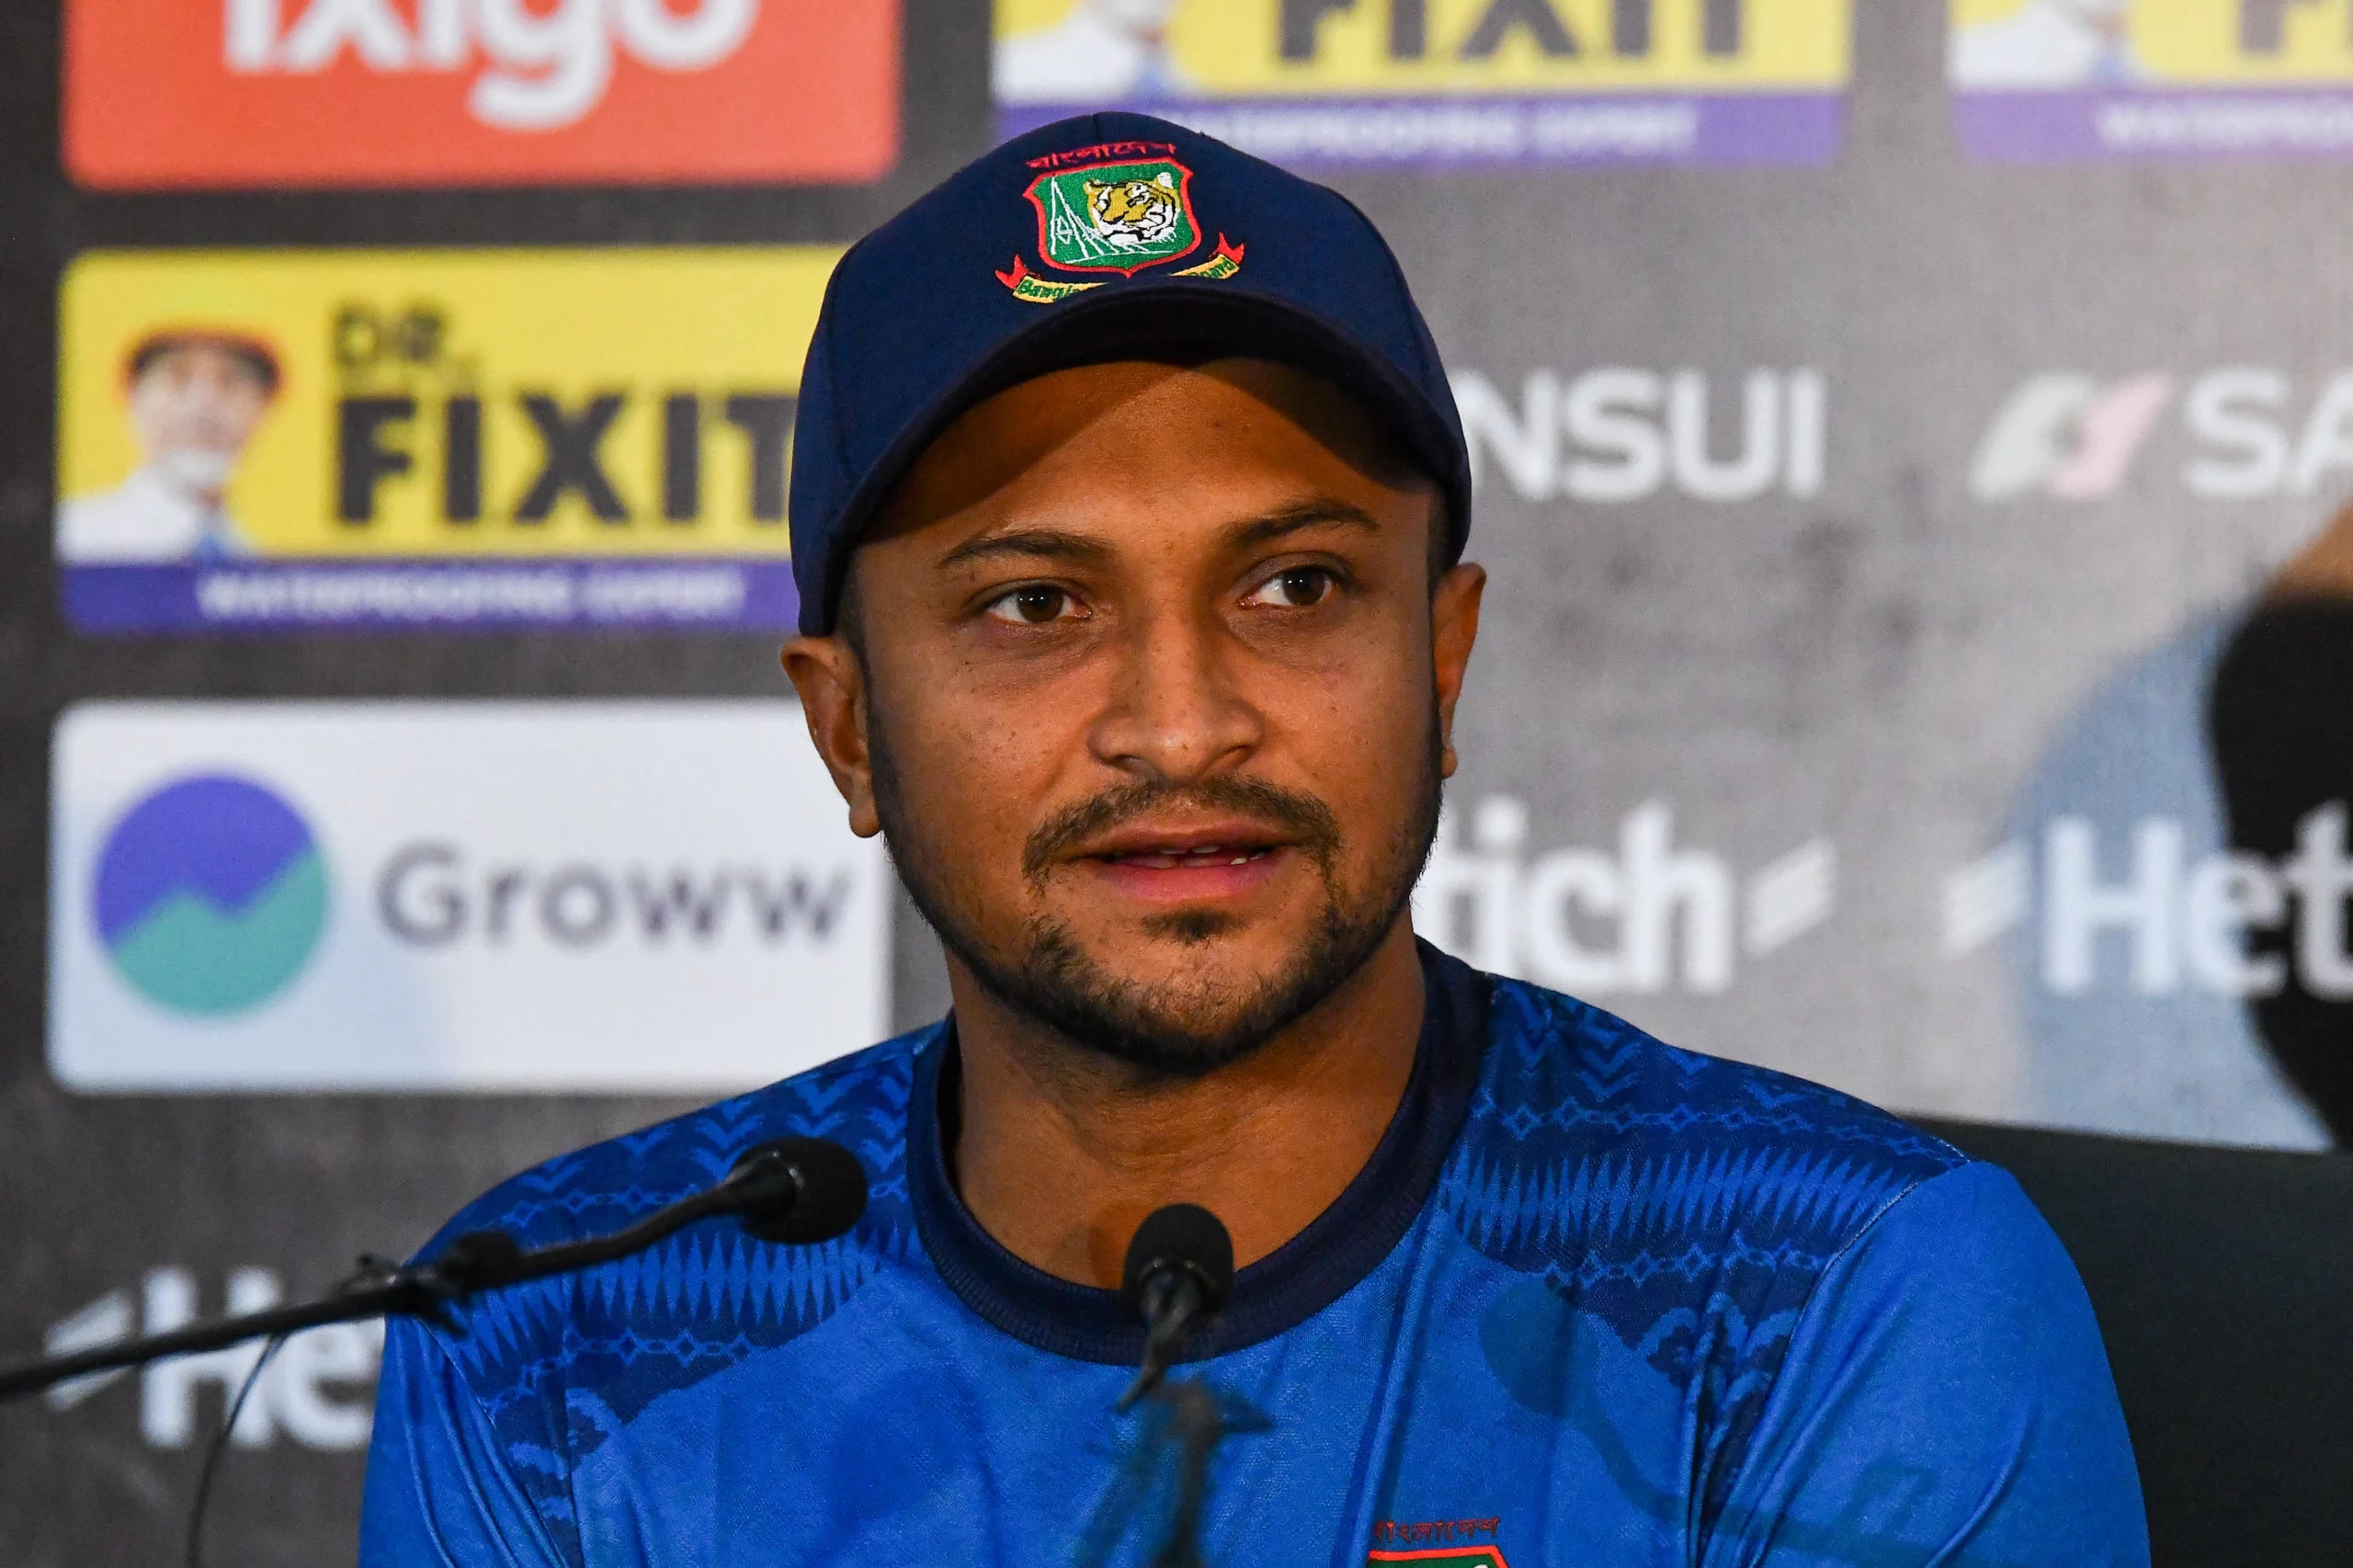 Bangladesh cricketer Shakib Al Hasan to contest election from hometown constituency